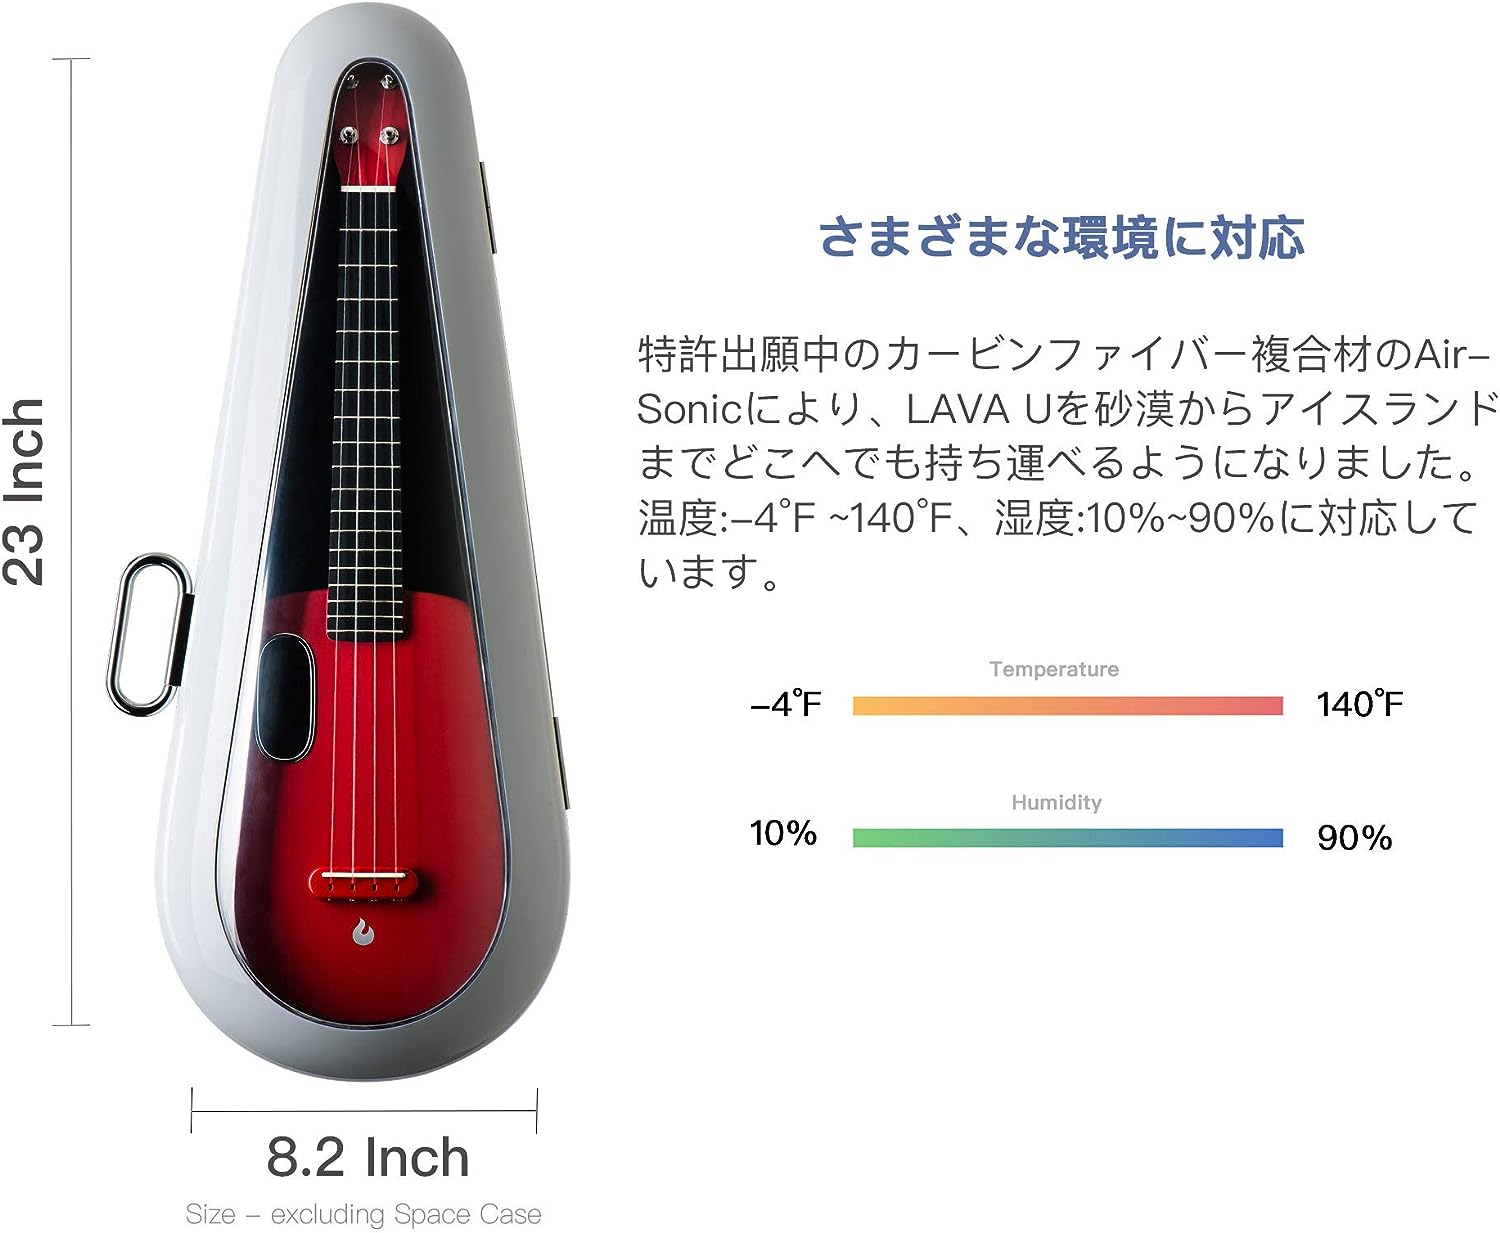 LAVA U Carbon Fiber FreeBoost Ukulele red, With Effects Without Plugging In Travel Ukulele With Case